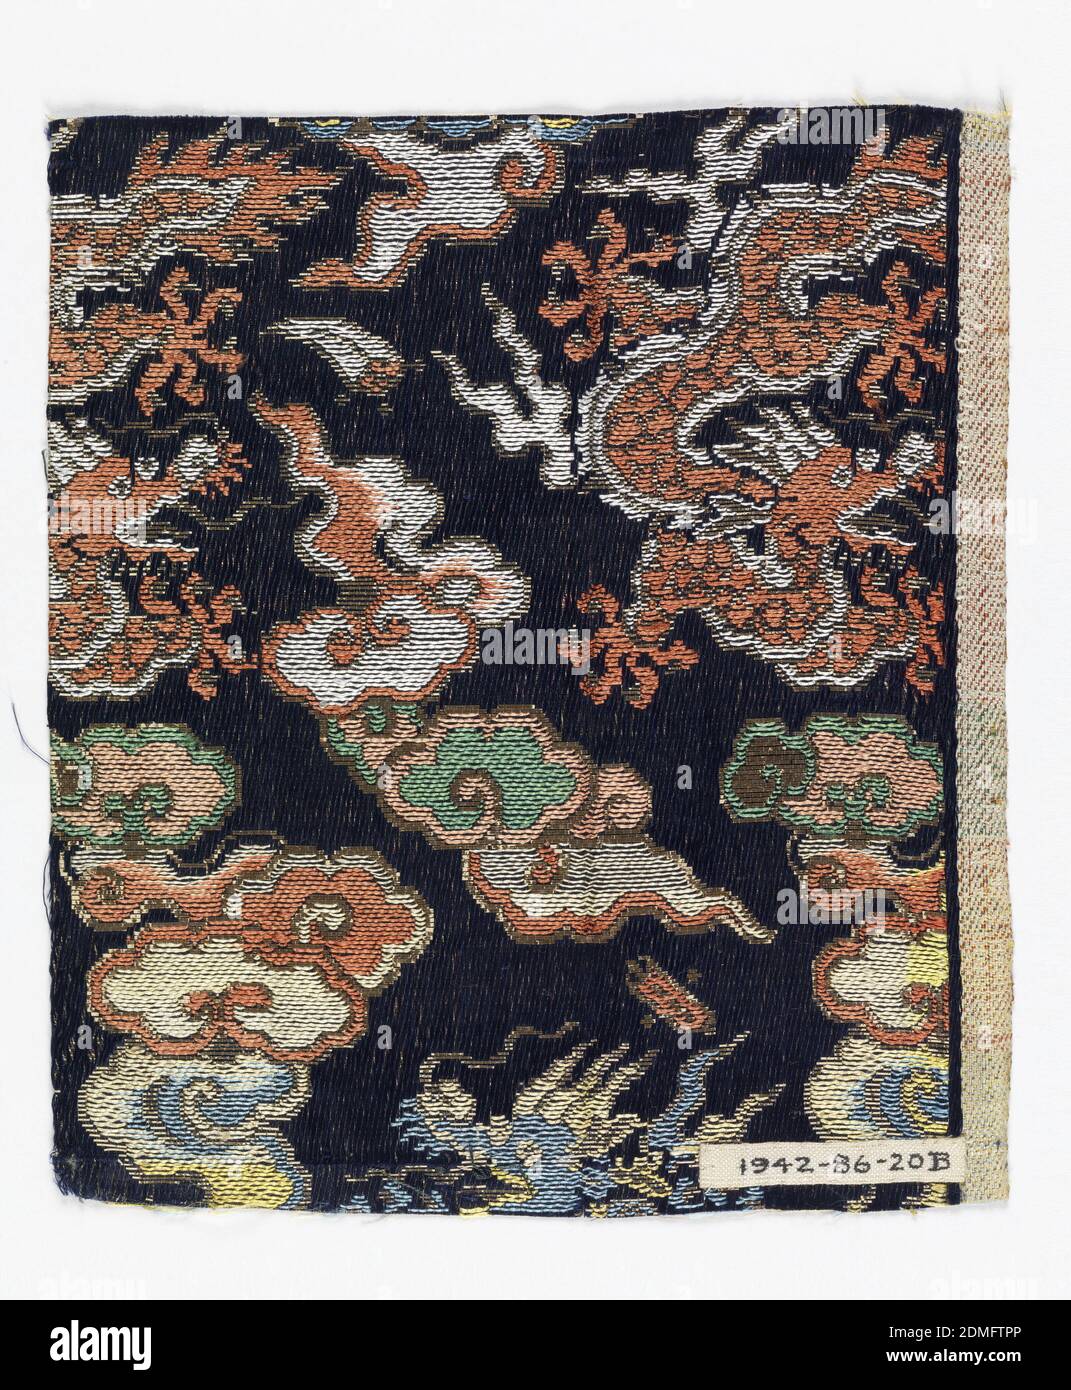 Textile fragments, Medium: silk, paper with applied gold foil Technique: plain compound twill, Navy blue twill ground with woven supplementary weft pattern of large scale dragons and flying clouds in rust, white, yellow, green, and sky blue silk threads with metallic paper threads., Japan, 19th century, woven textiles, Textile fragments Stock Photo